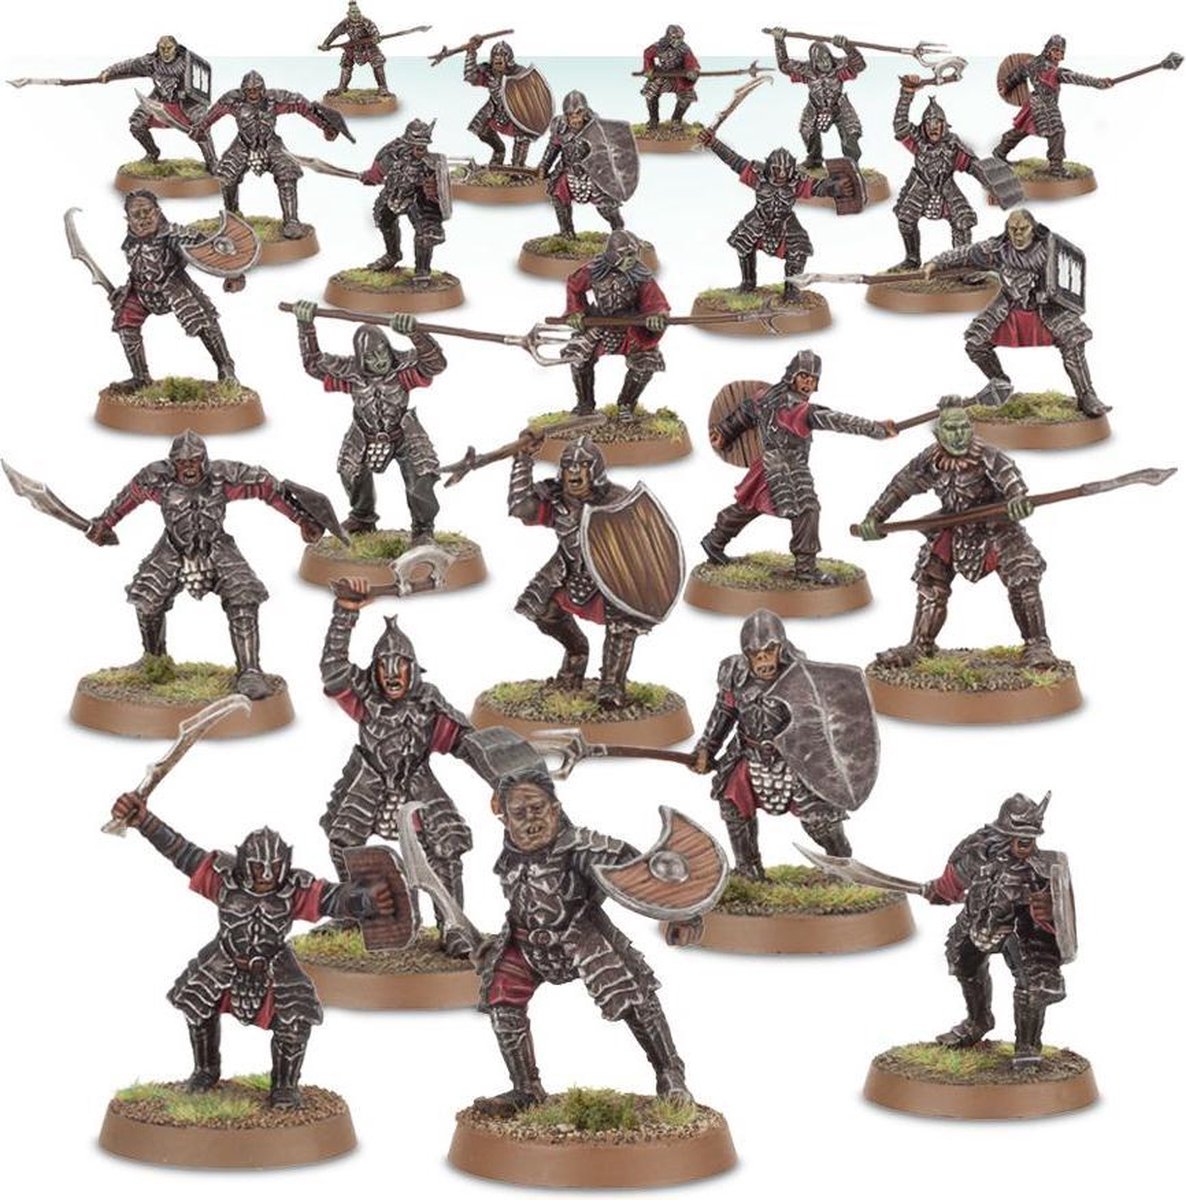 Warhammer: The Lord Of The Rings - Morannon Orcs | bol.com